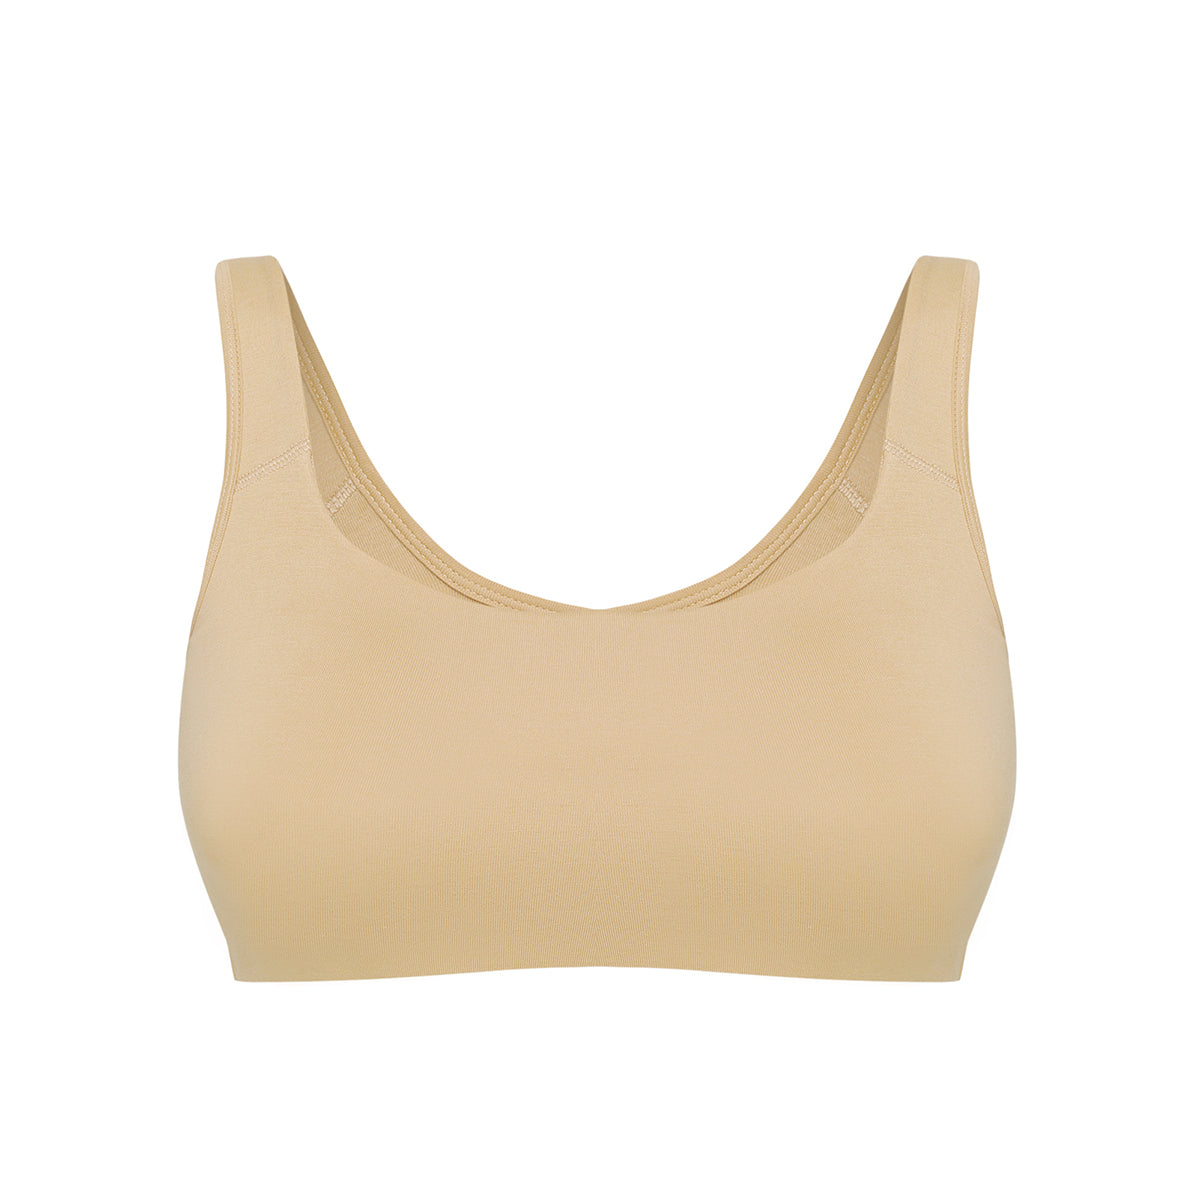 Soft cup easy-peasy slip-on bra with Full coverage - Nude NYB113